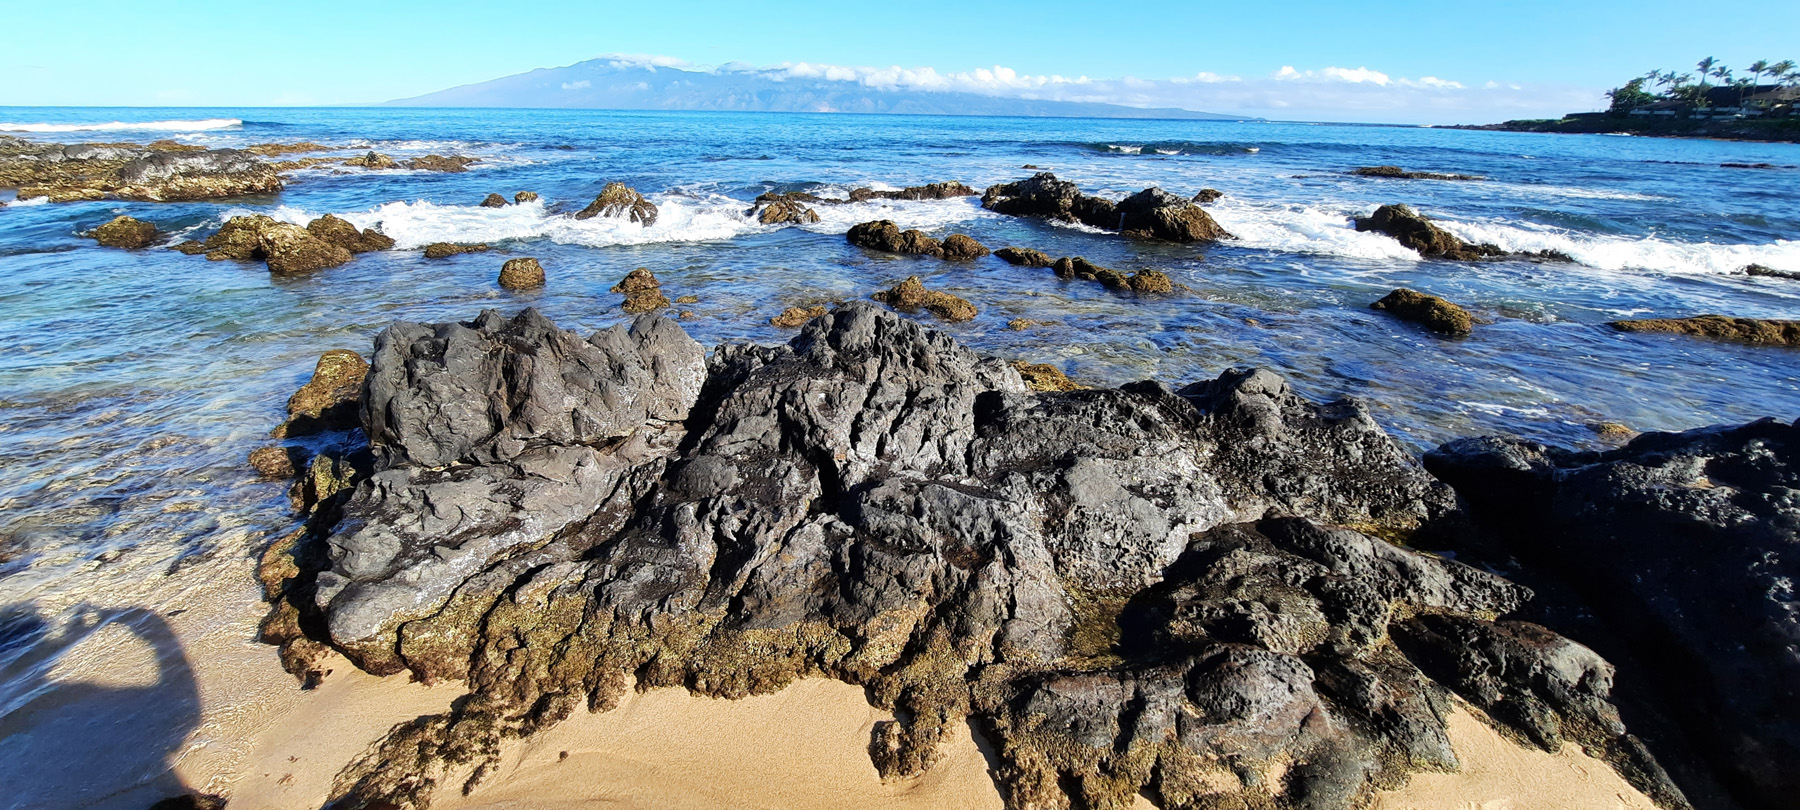 Kaanapali Beach, Maui.  Taken with my phone.  Click for next photo.